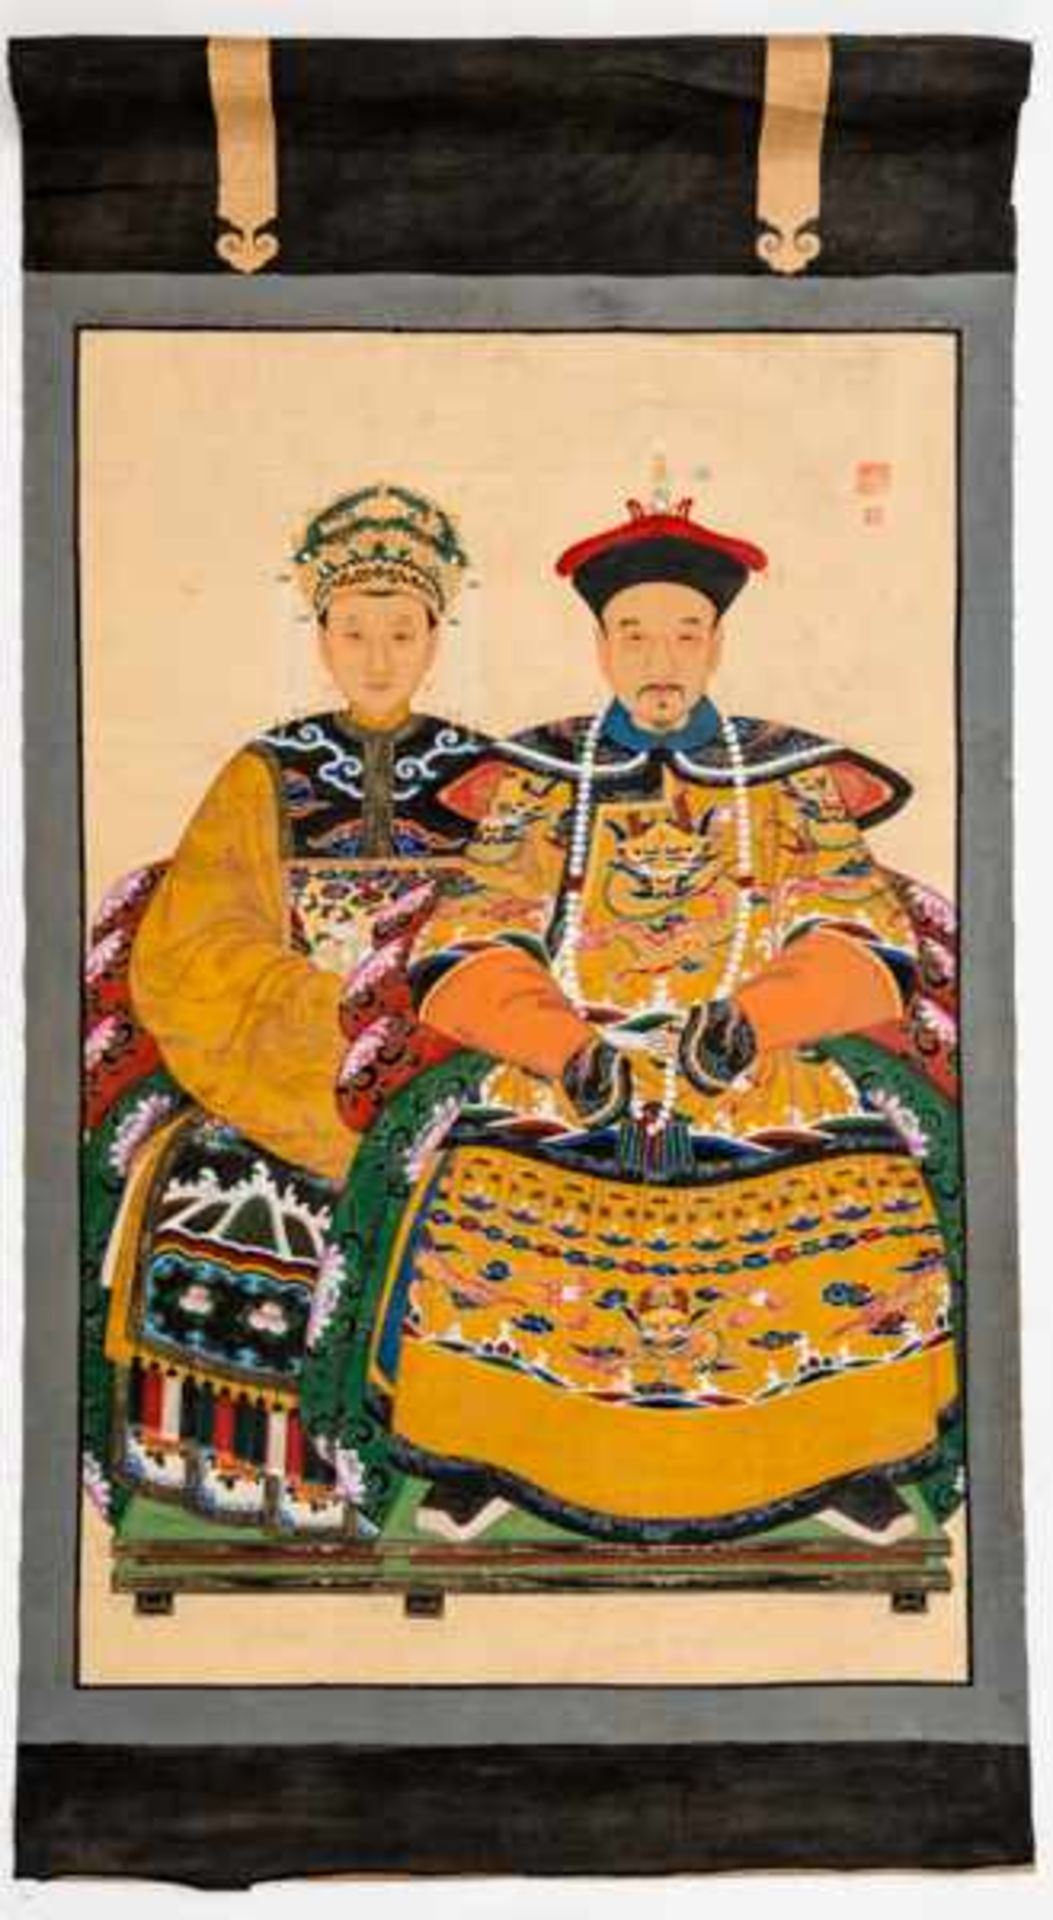 LARGE ANCESTRAL PORTRAIT Paint and gold on fabric. China, Qing dynasty(1644 - 1912)大幅祖先畫像Large